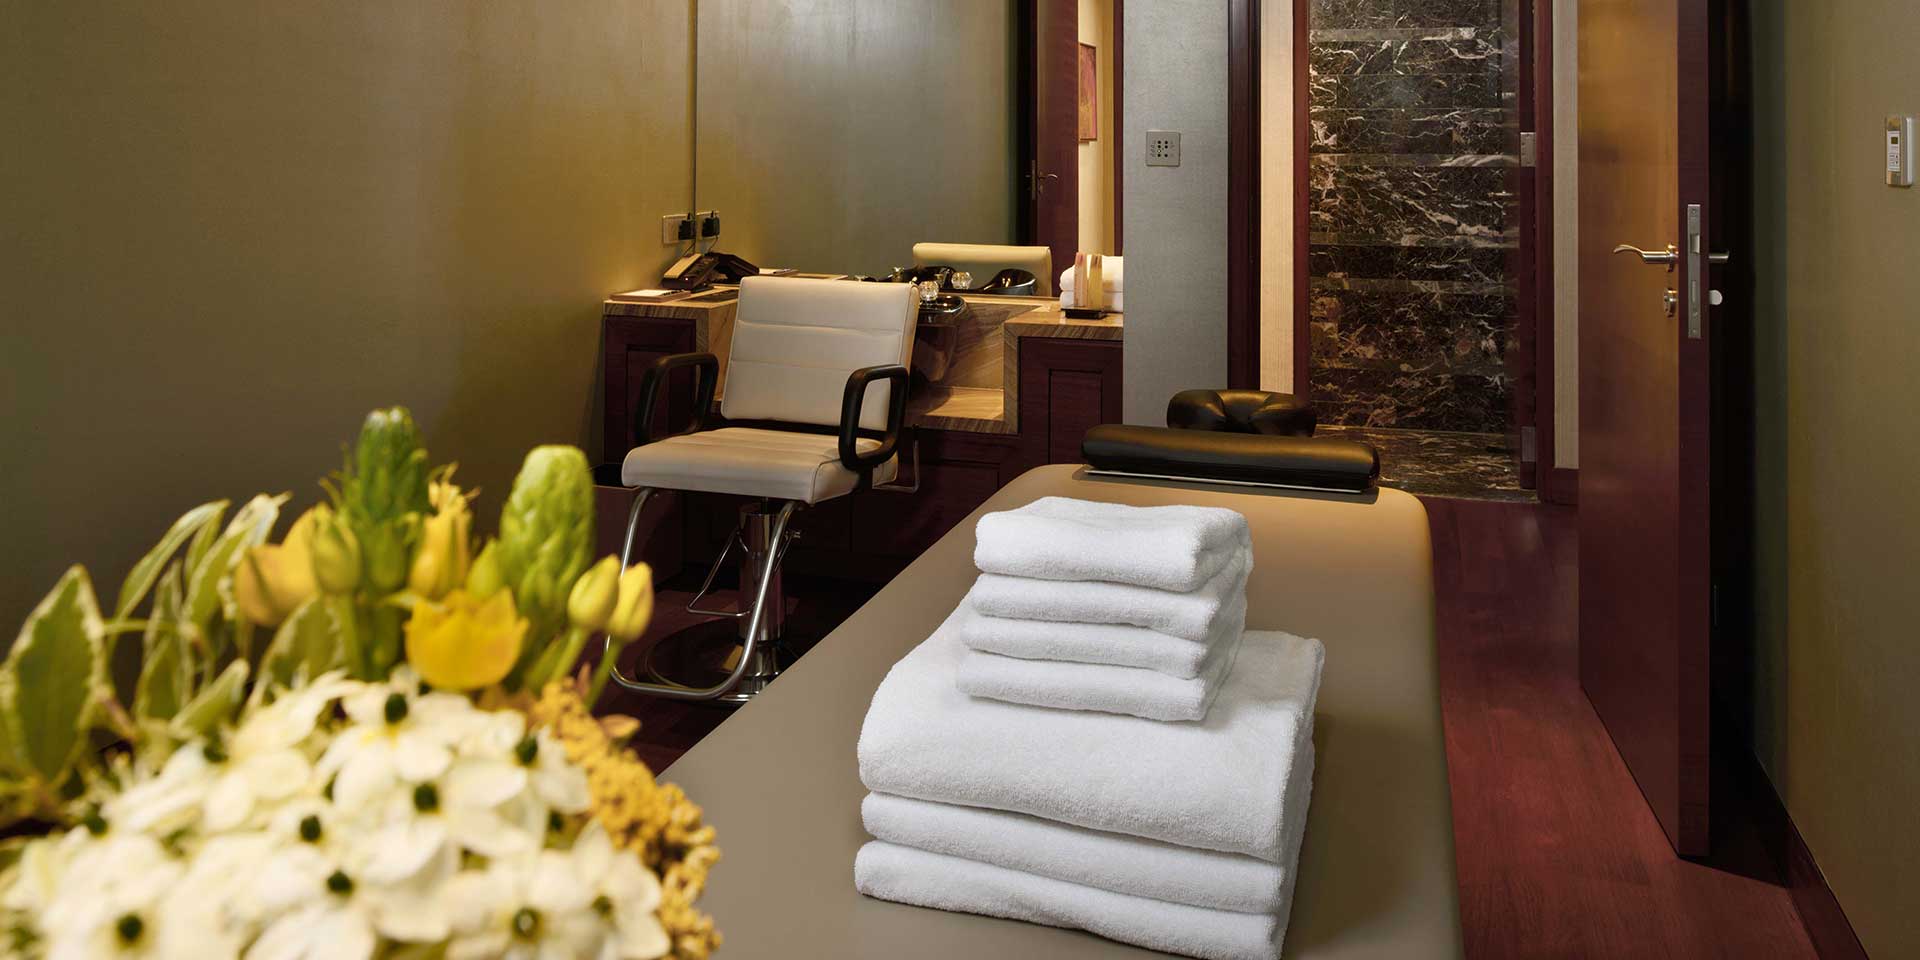 Straits Suite with Spa & Fitness Room, at Marina Bay Sands